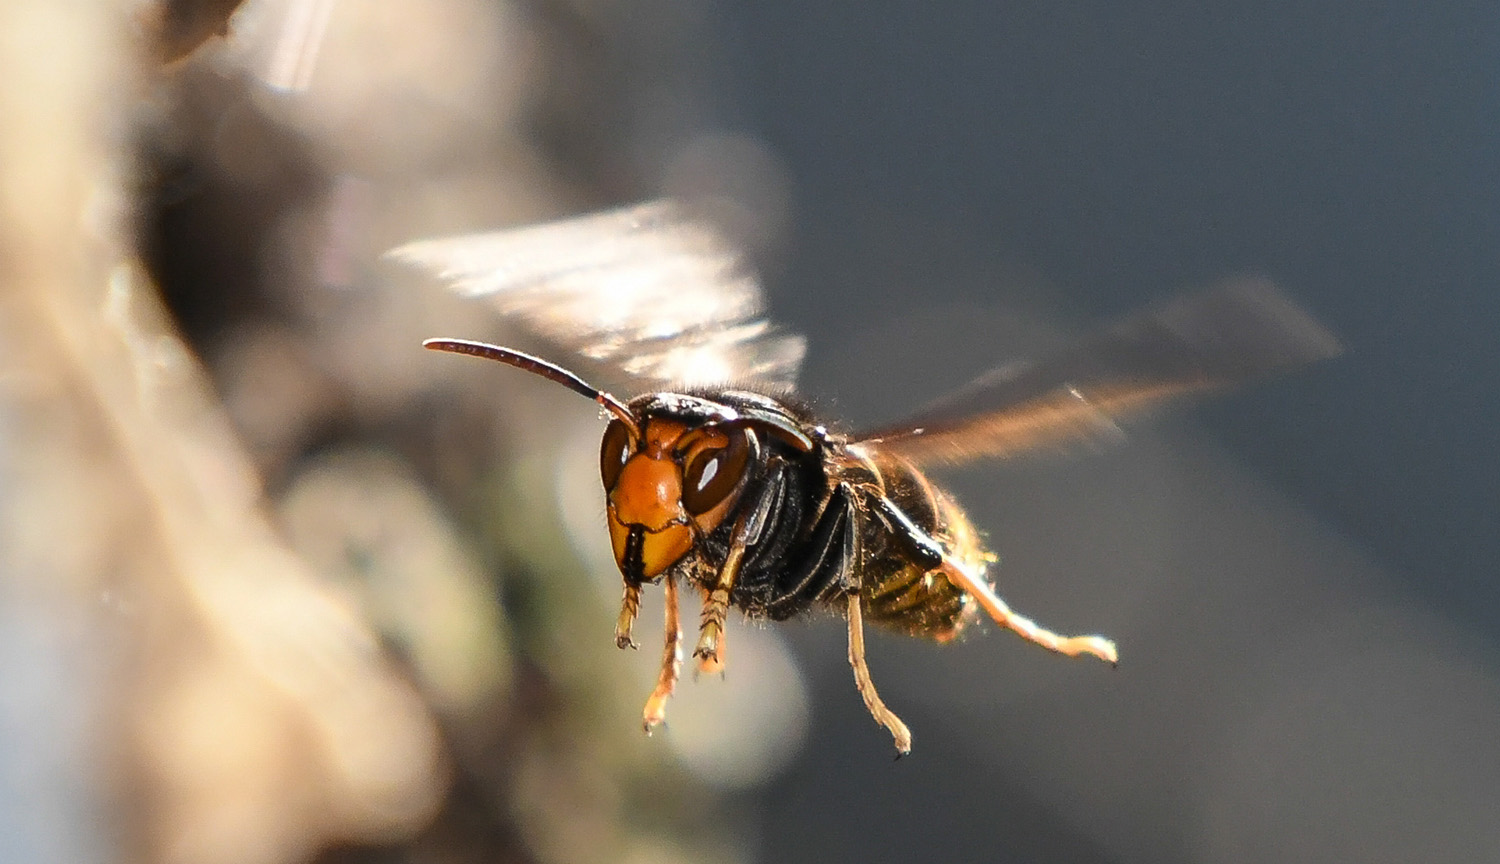 Photo shows a large wasp in flight, with a black body, yellow legs and a brown face.